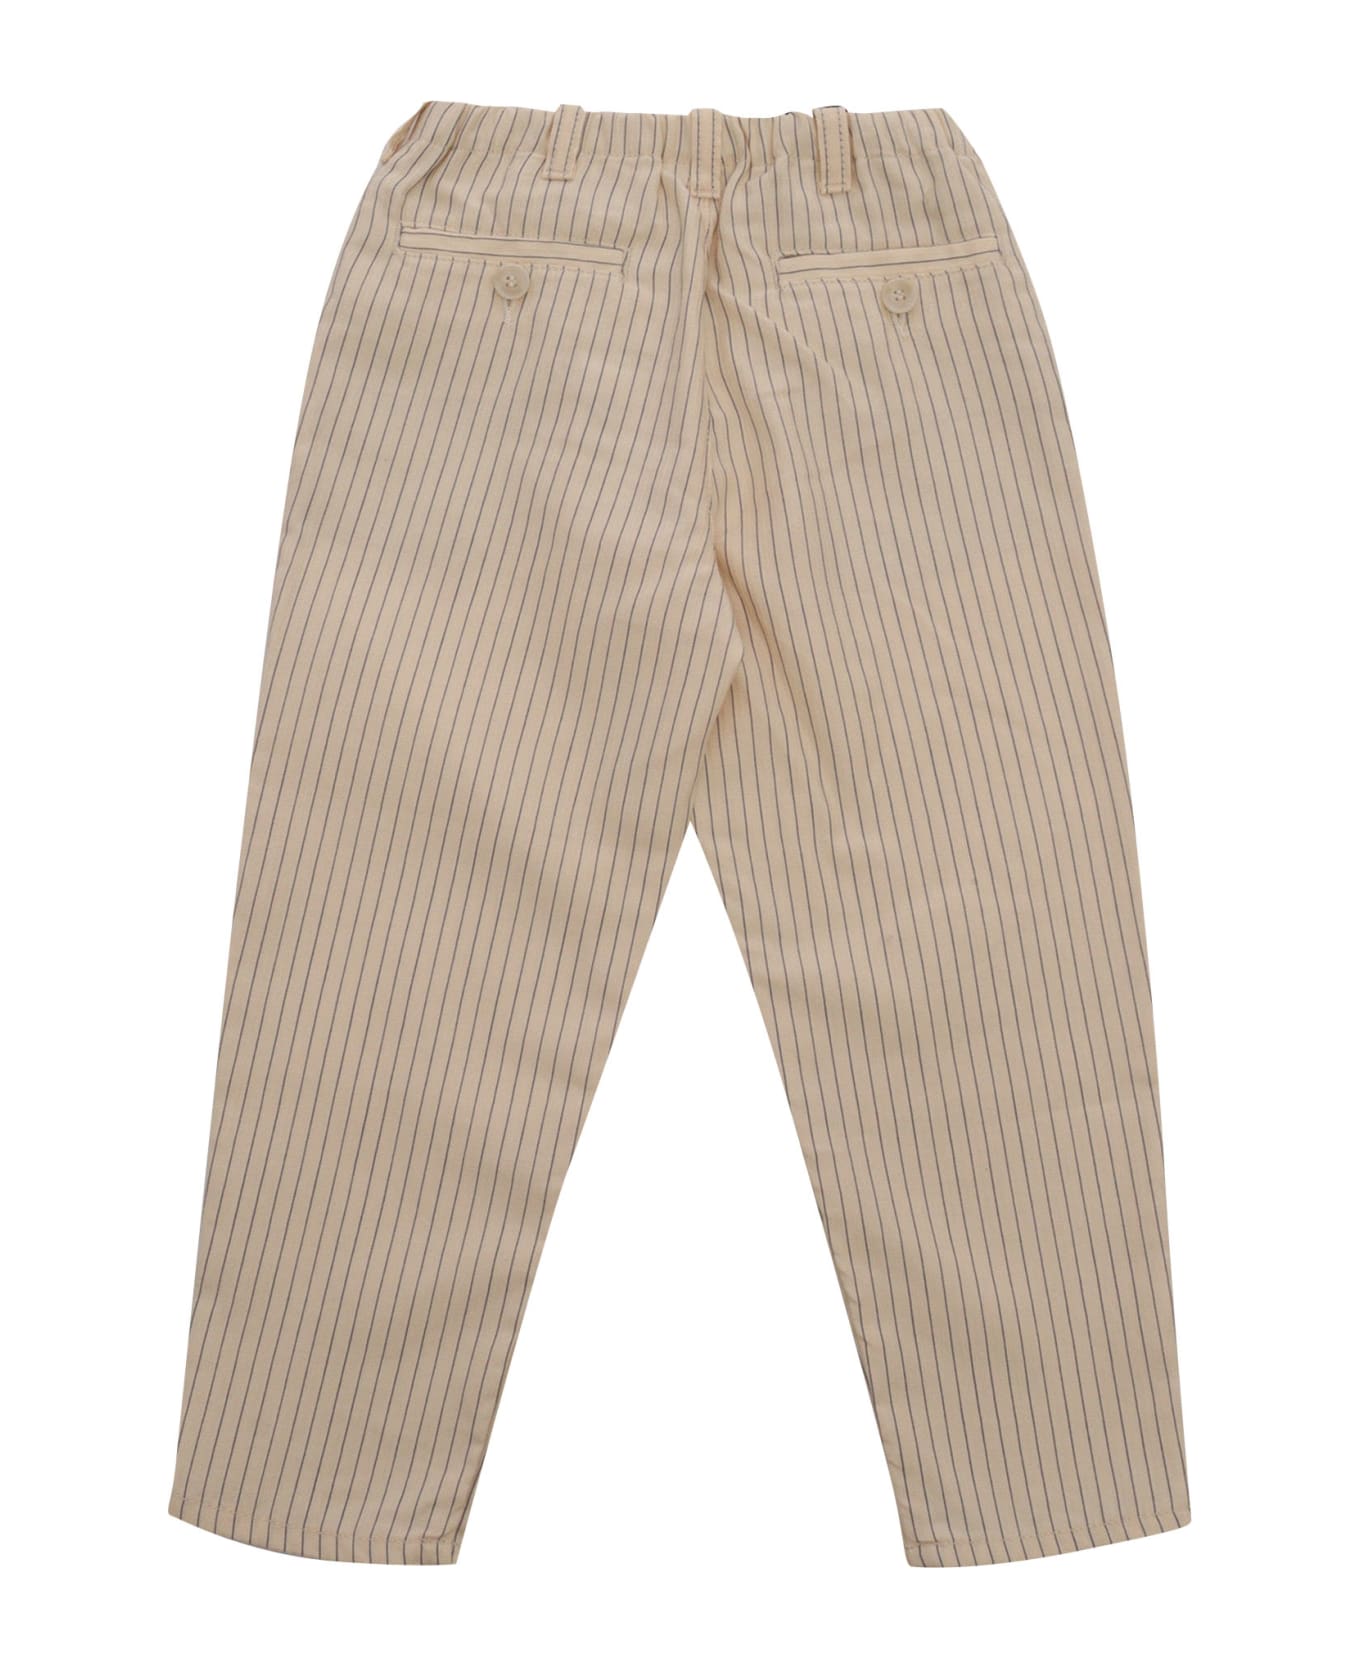 Emporio Armani Beige Trousers With Striped Pattern - BEIGE